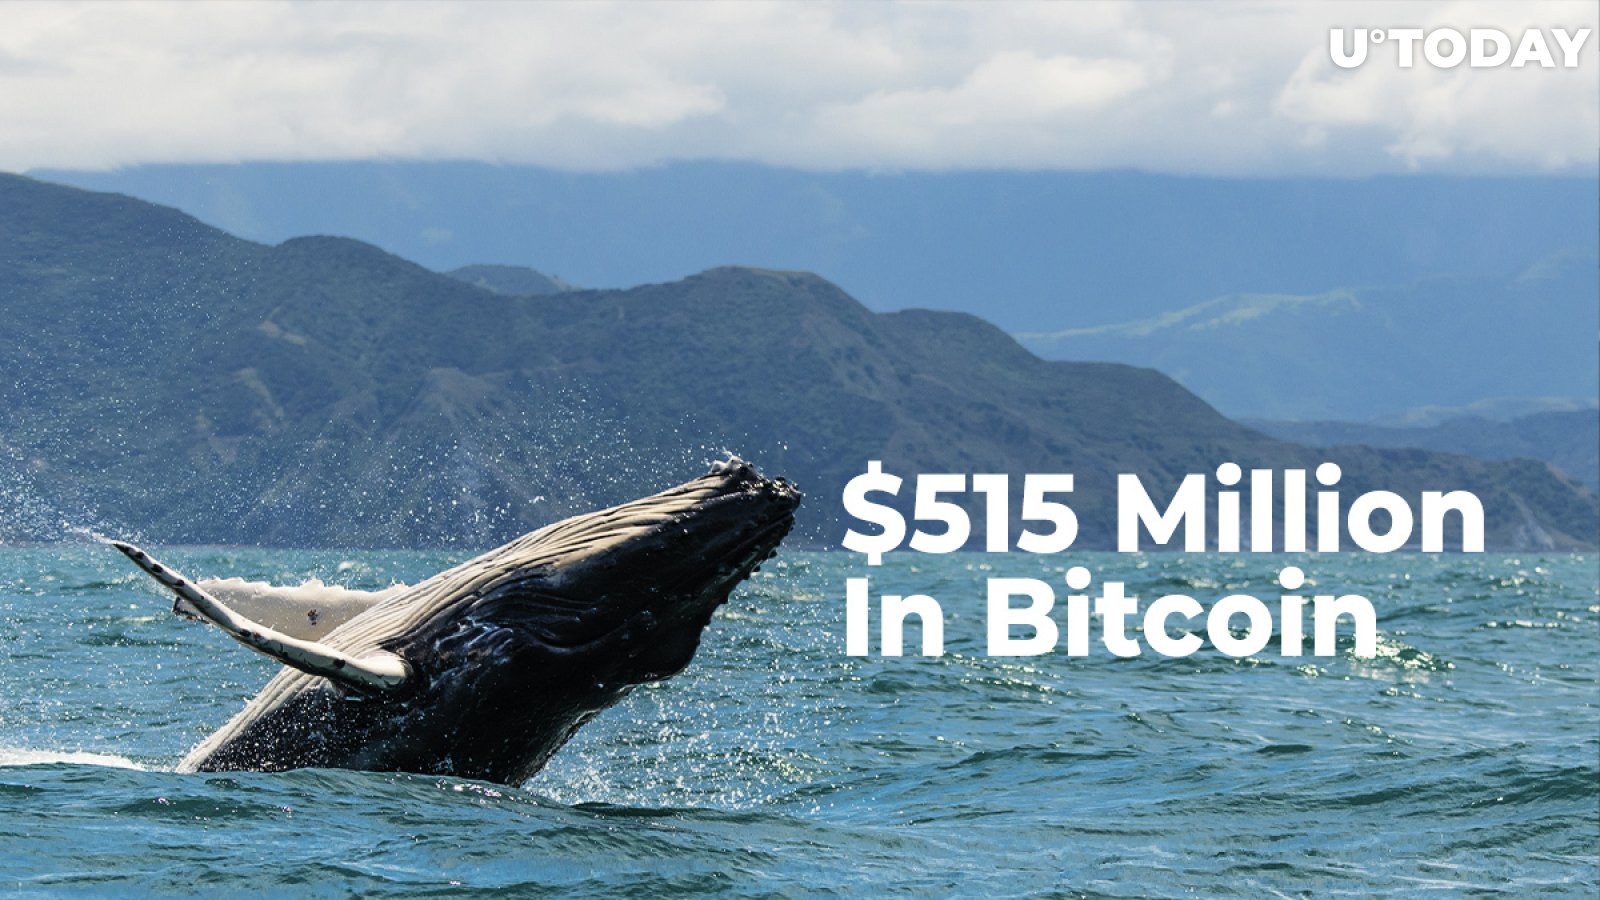 Whales Shift Whopping $515 Million In Bitcoin in Past Ten Hours 